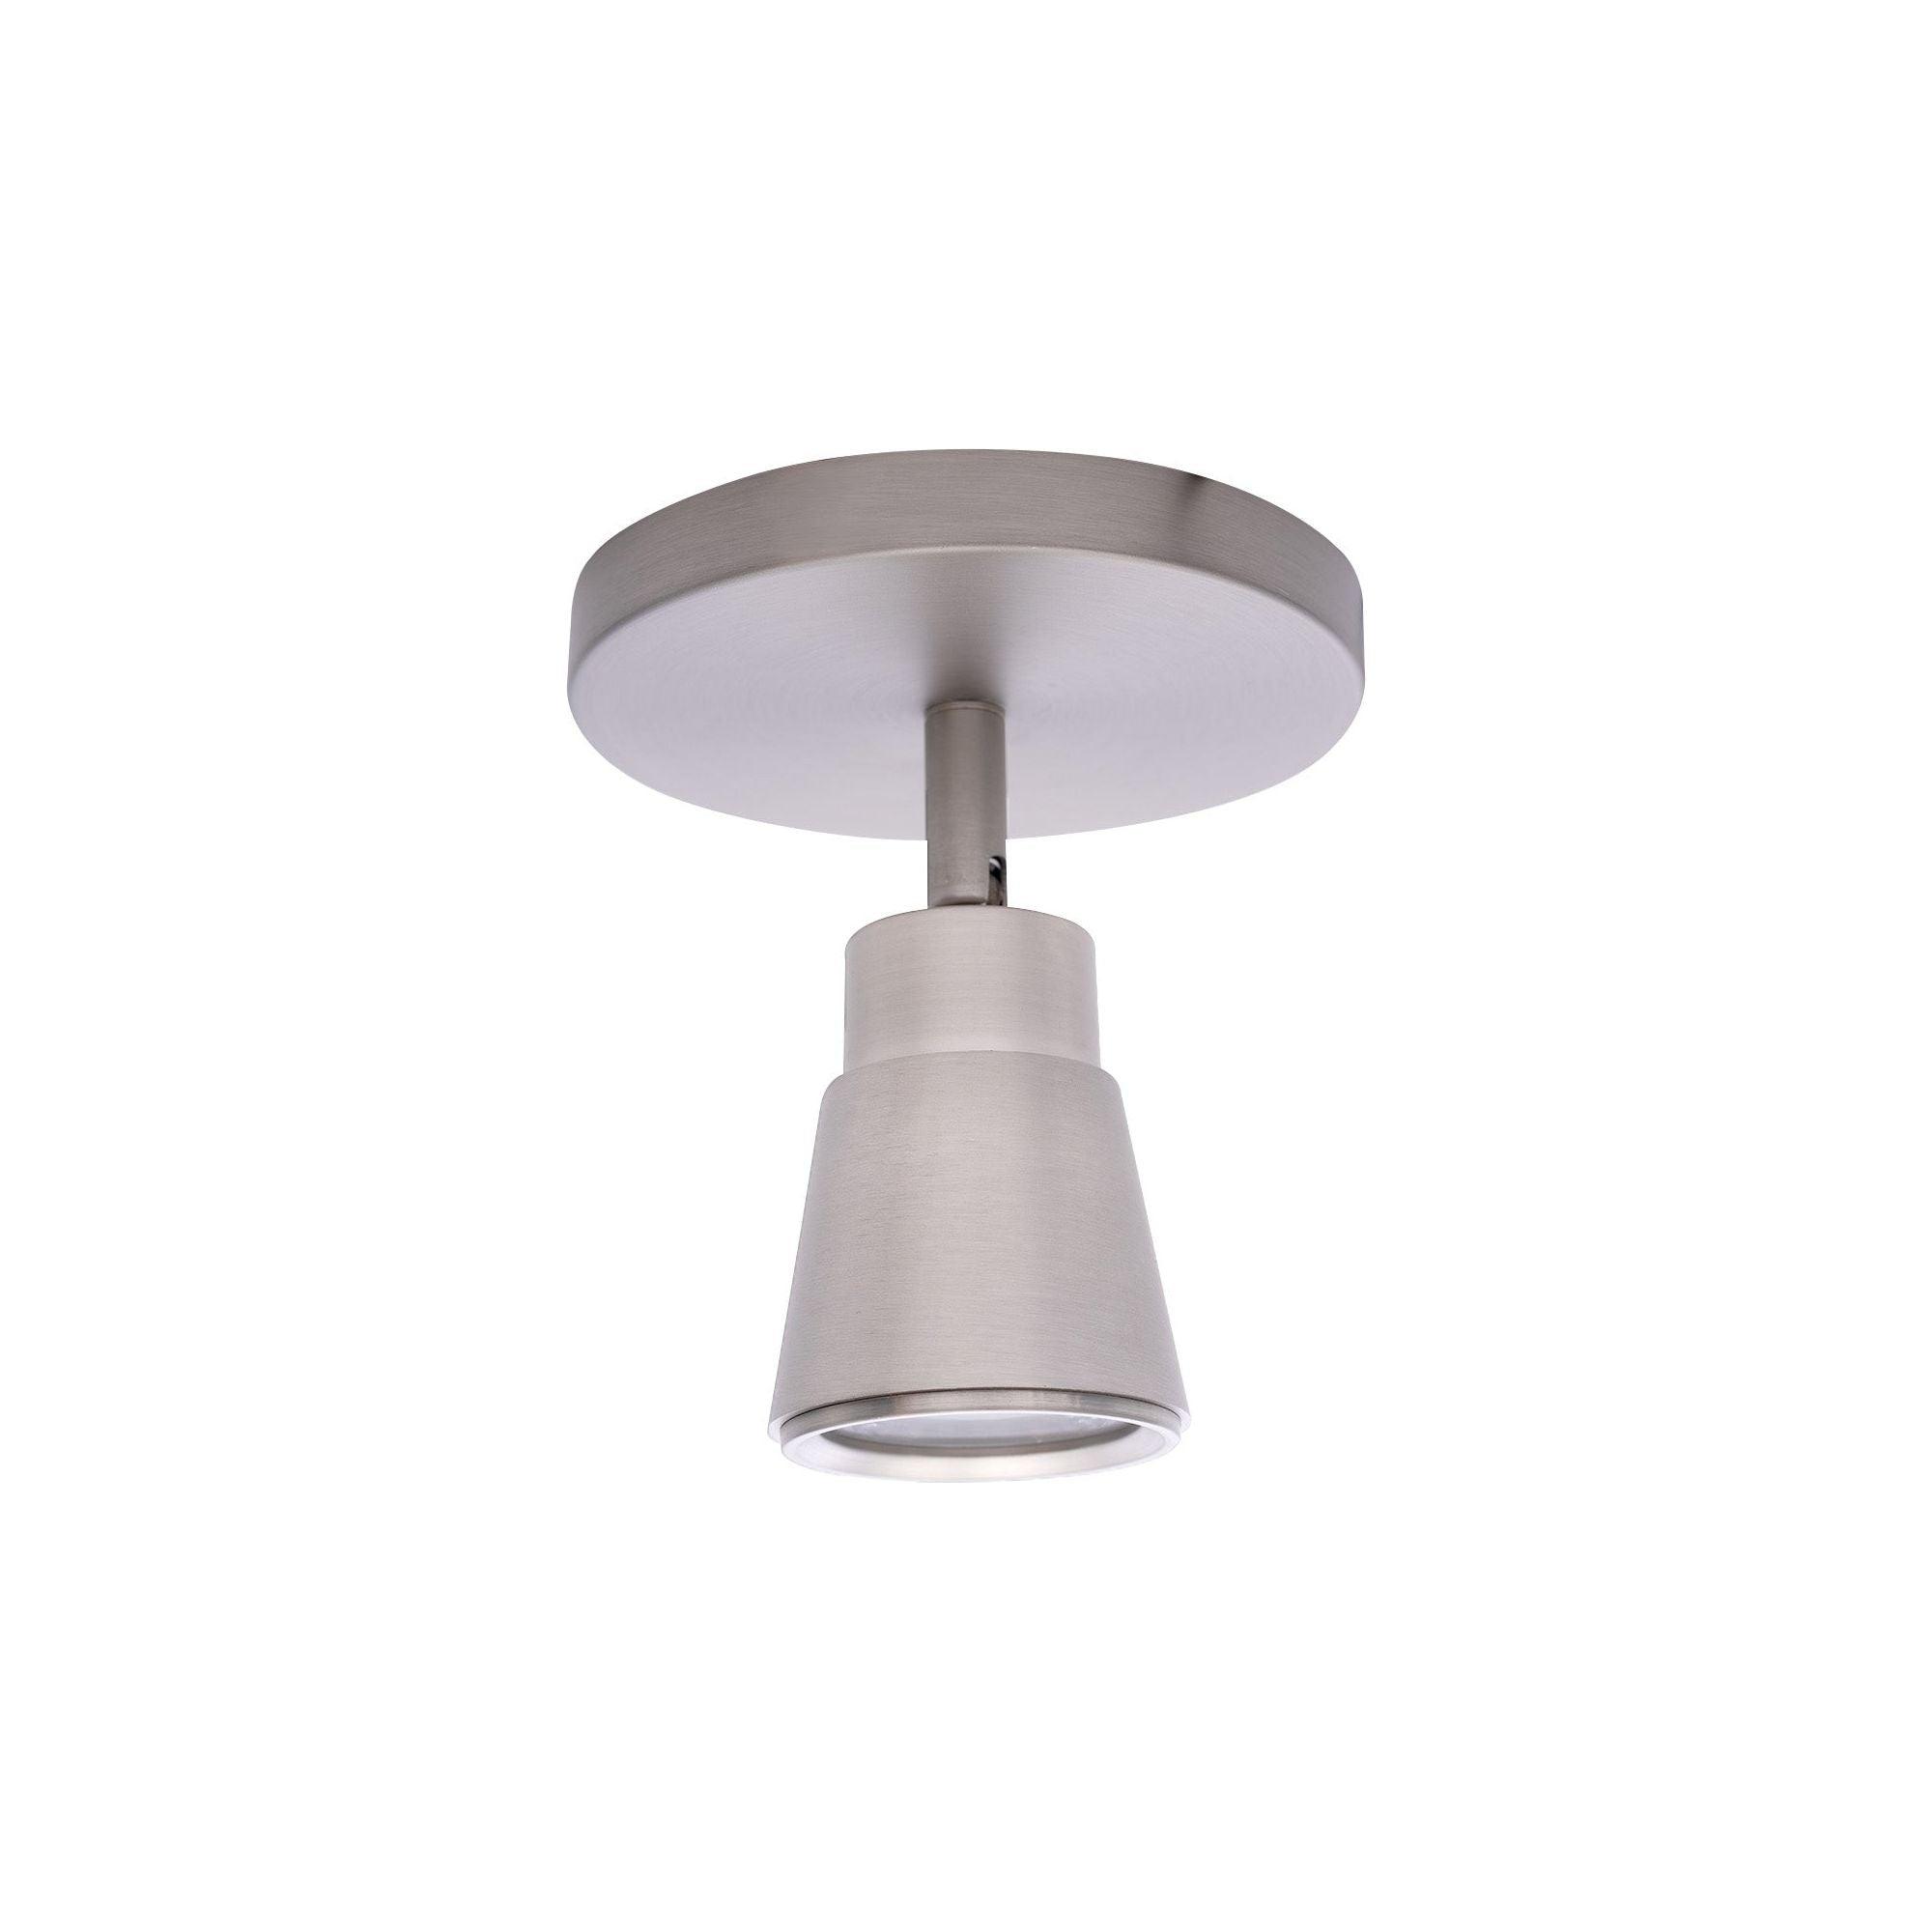 WAC Lighting - Solo LED Energy Star Monopoint - Lights Canada